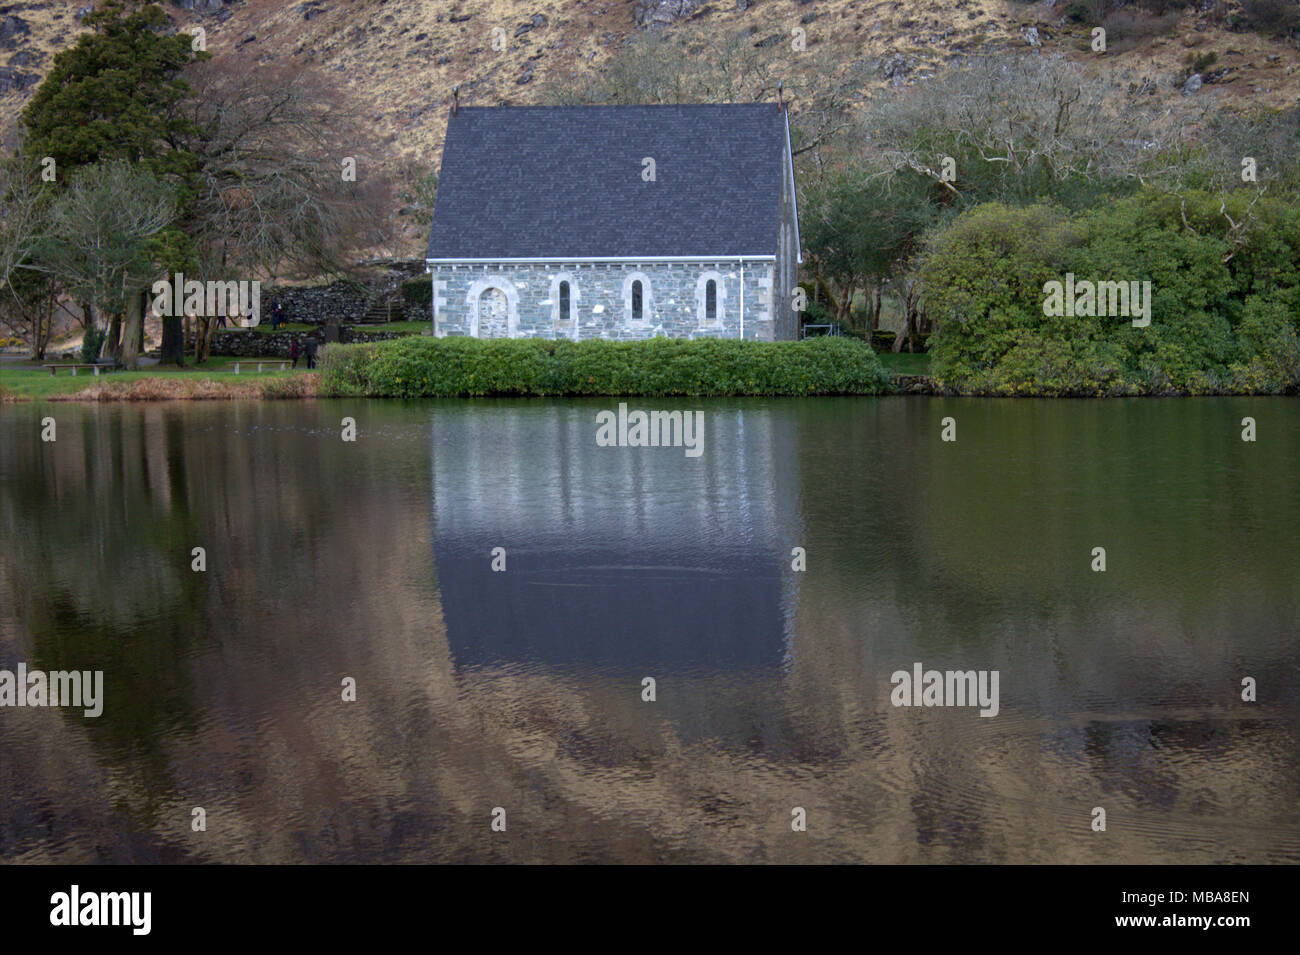 gougane barra church and  shrine of Saint Finbarr, the first bishop of cork, reflected in the atmospheric lake surrounding the church. Stock Photo